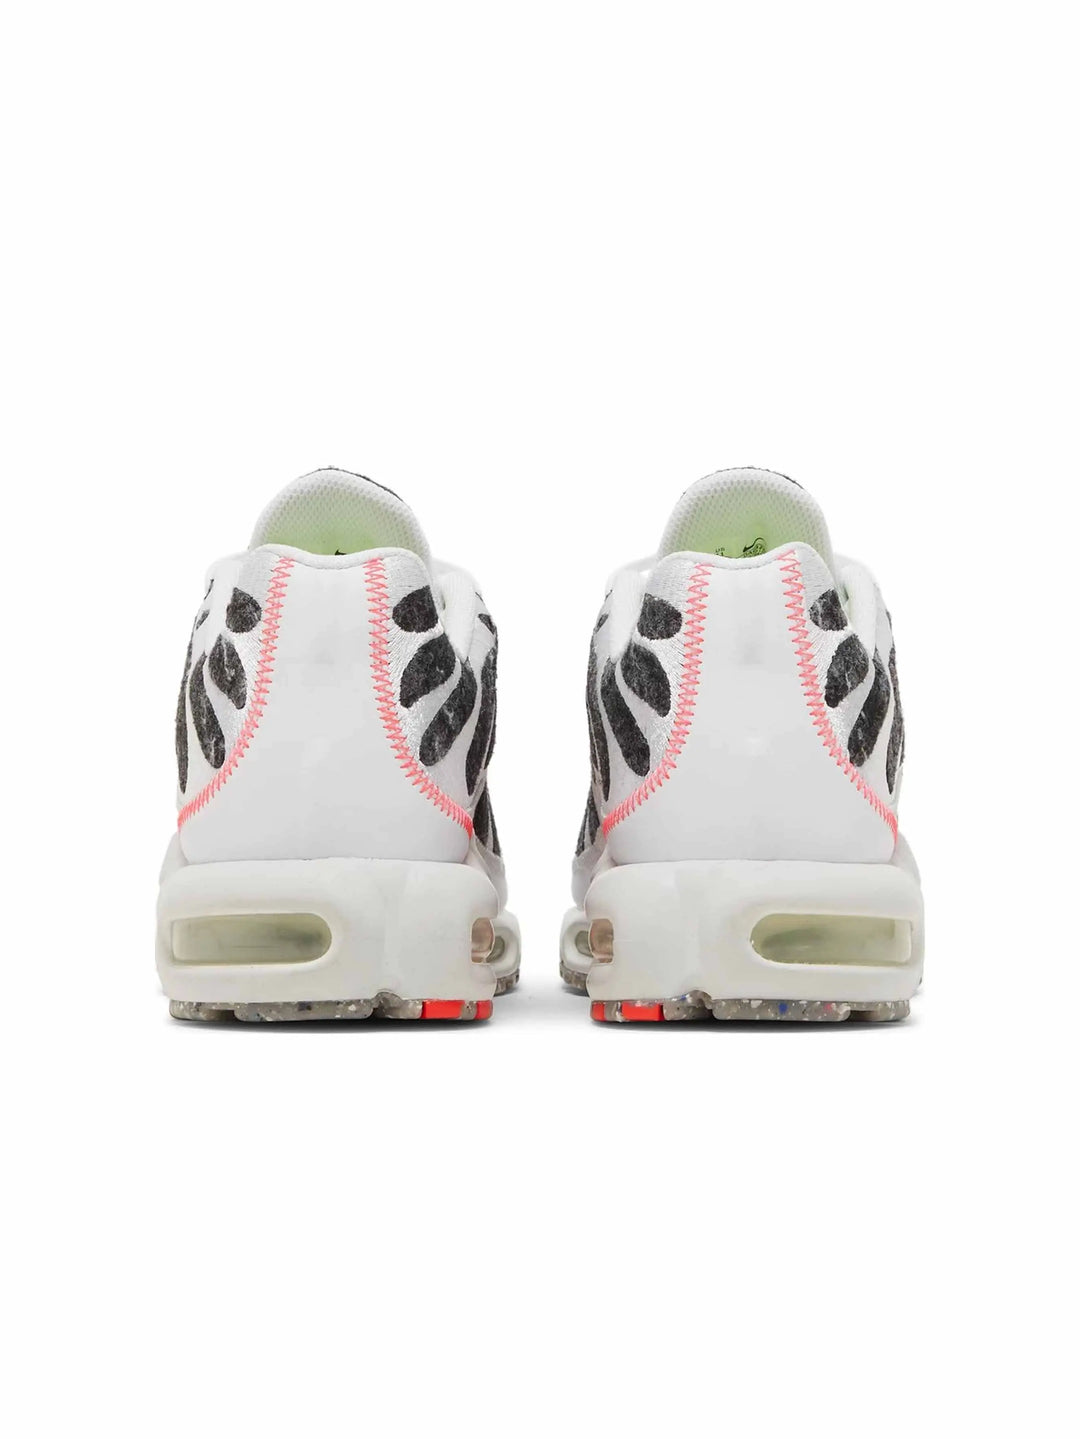 Nike Air Max Plus Essential Crater in Auckland, New Zealand - Shop name